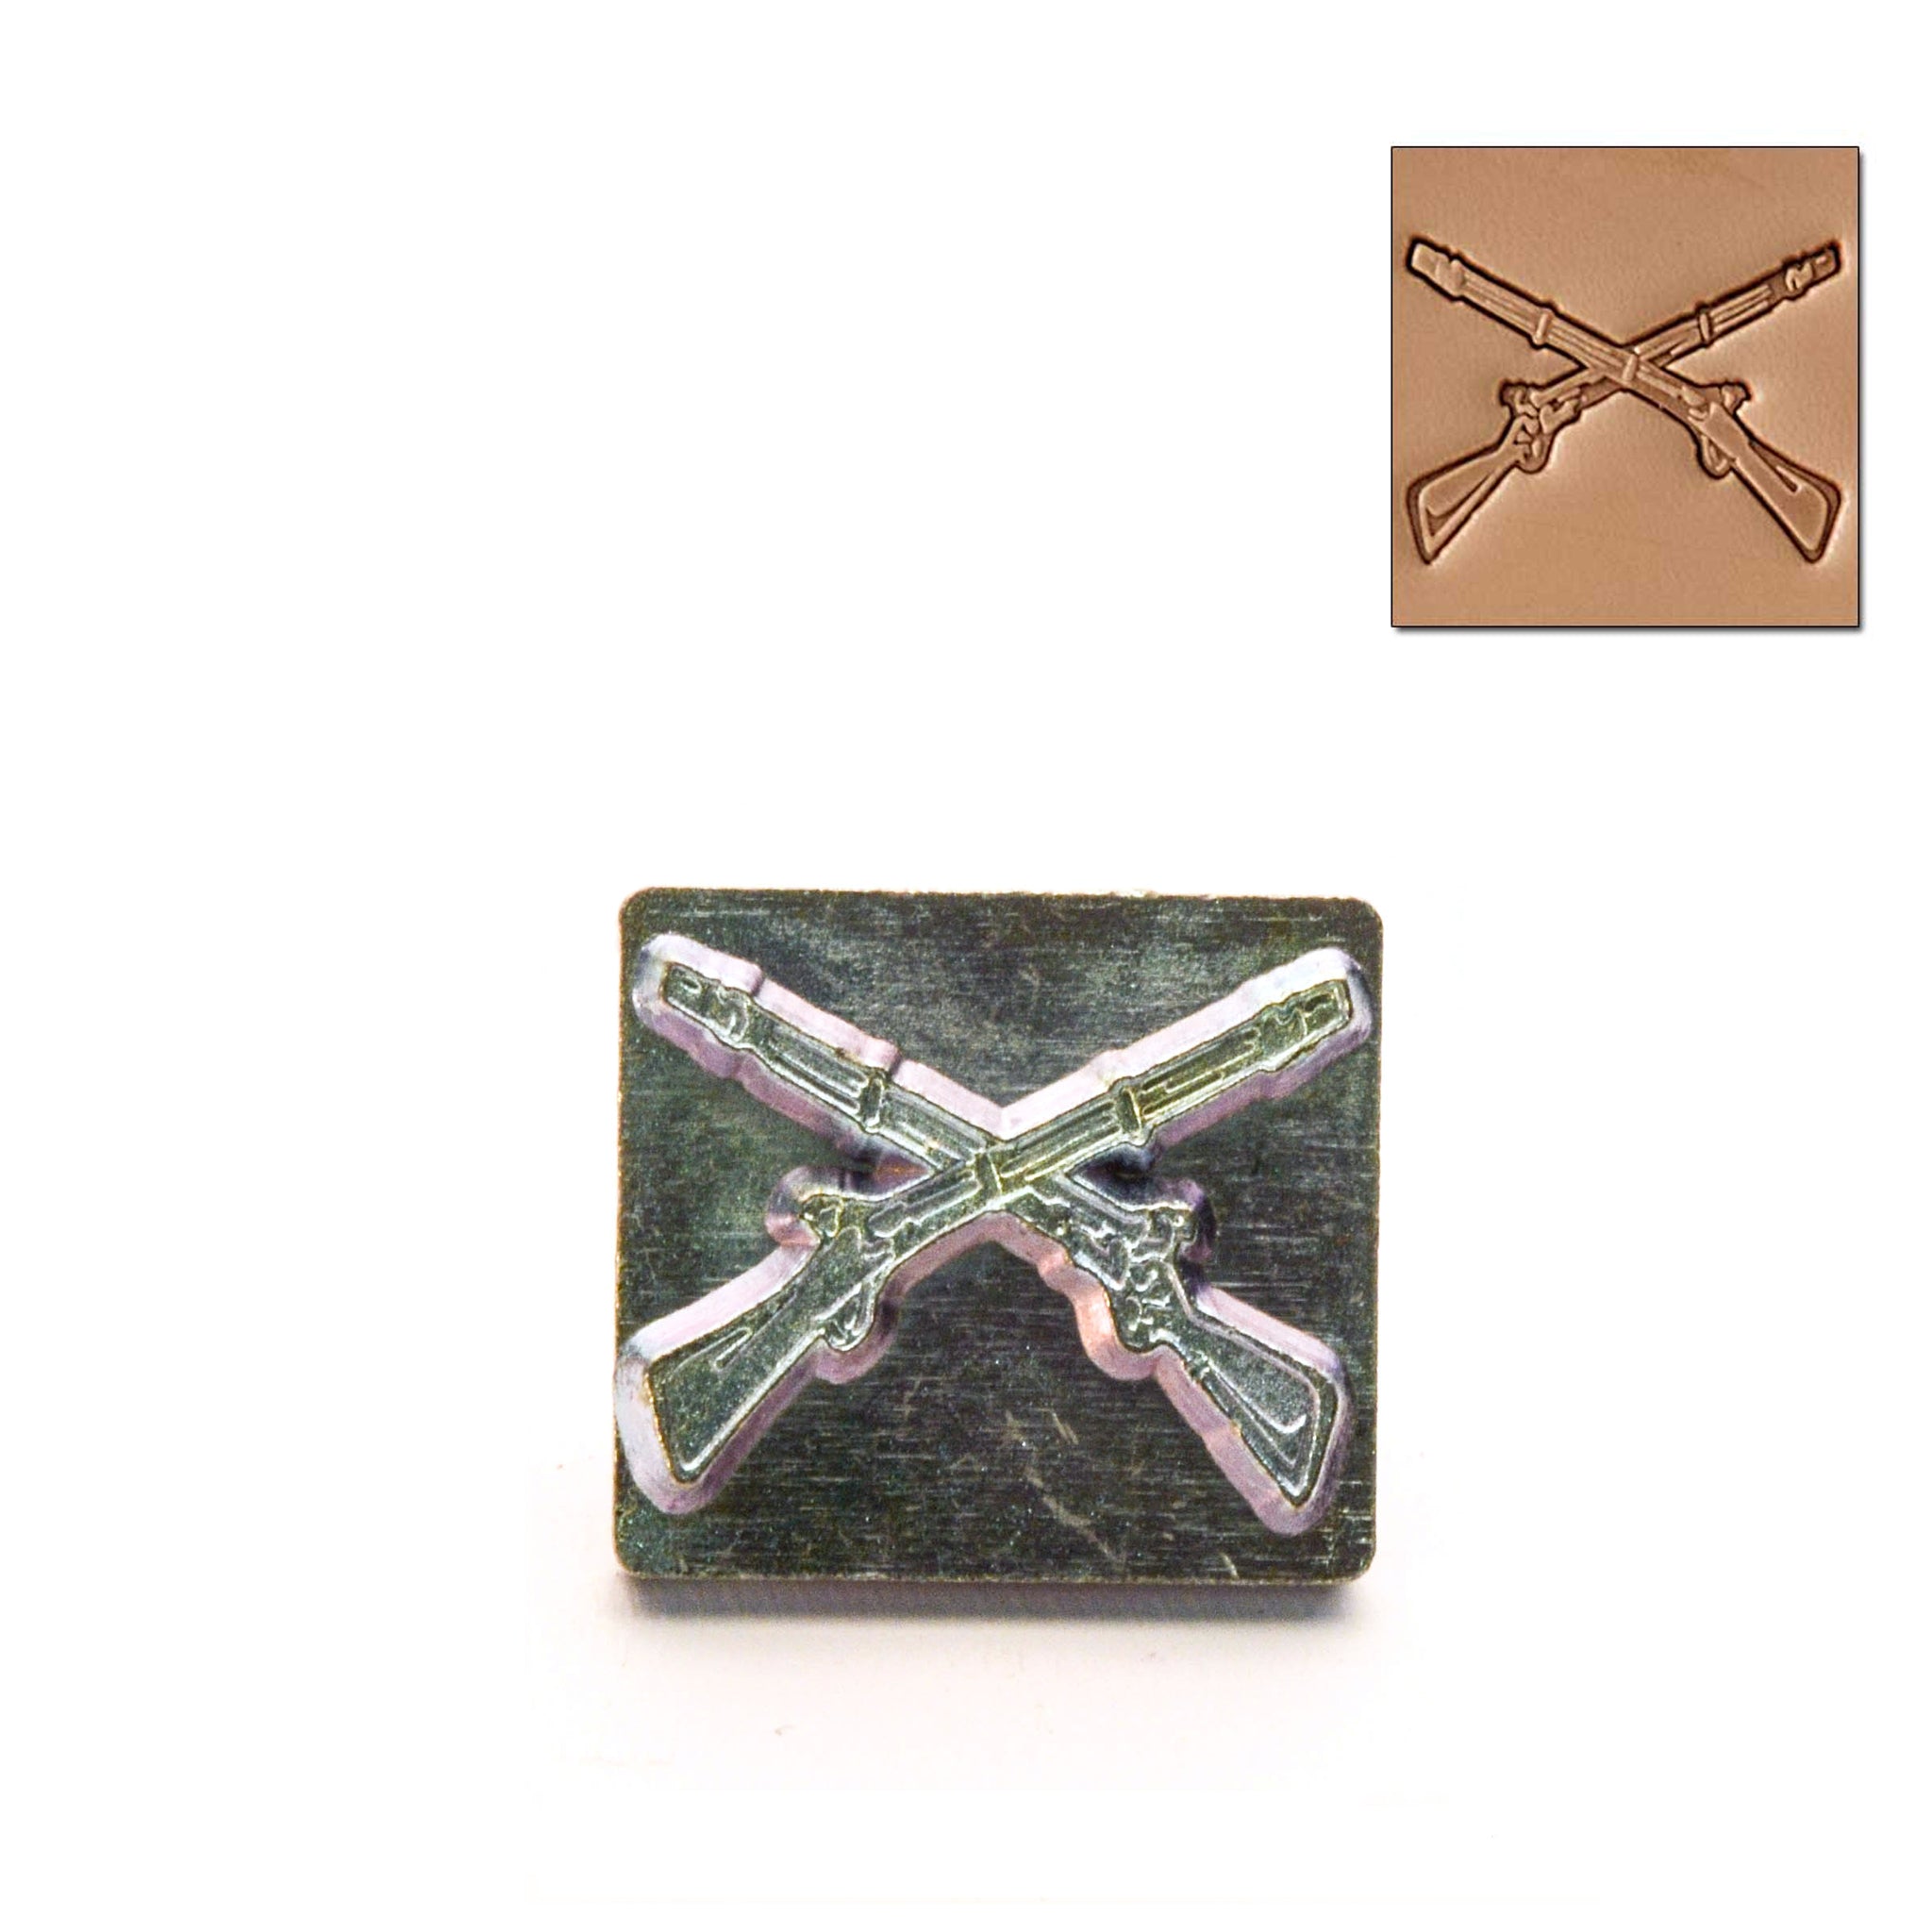 Crossed Rifles 3D Embossing Stamp from Identity Leathercraft